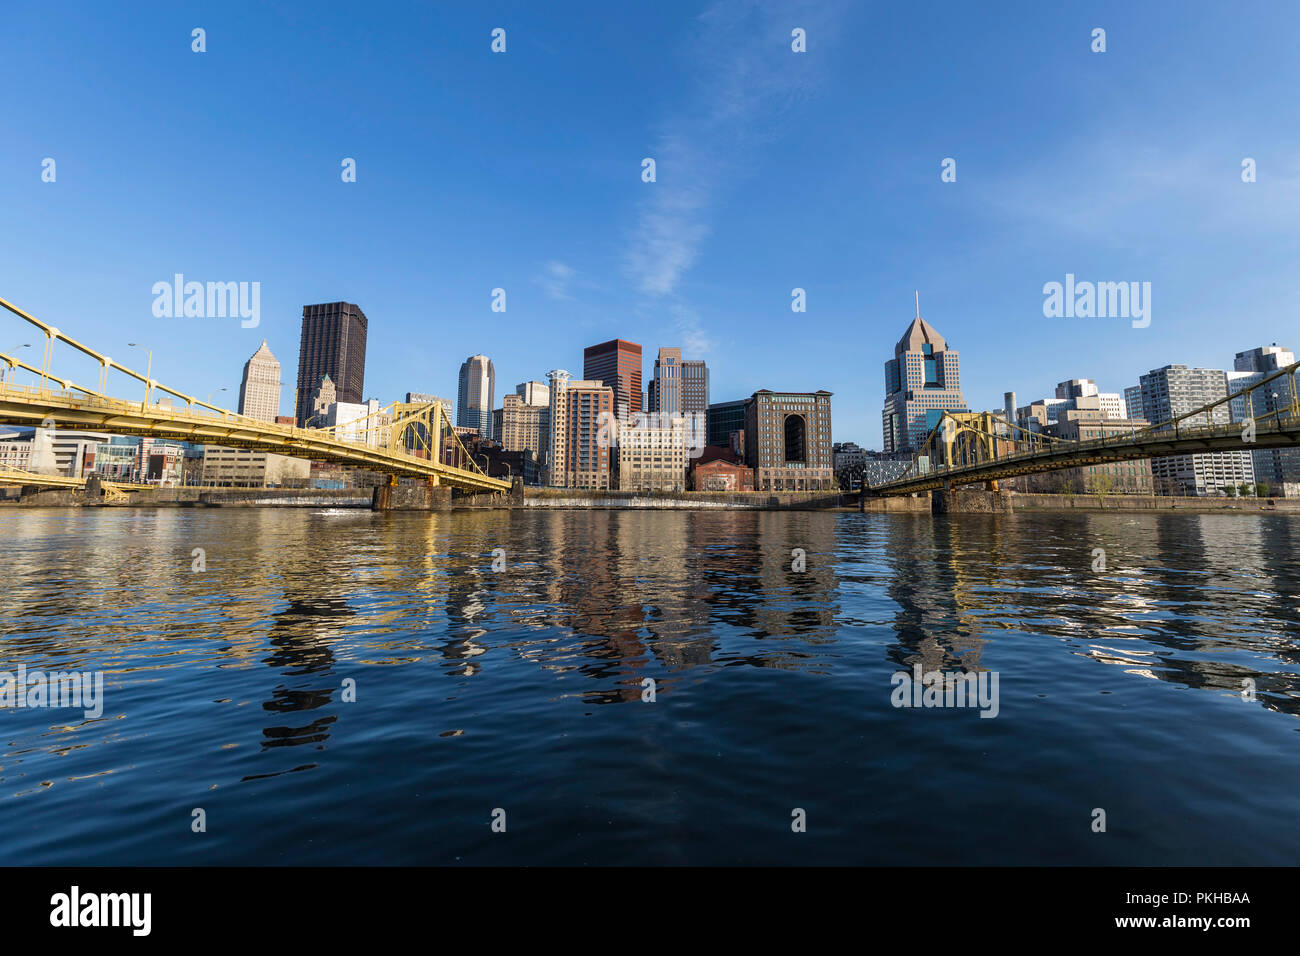 Downtown urban waterfront and bridges crossing the Allegheny River in Pittsburgh Pennsylvania. Stock Photo